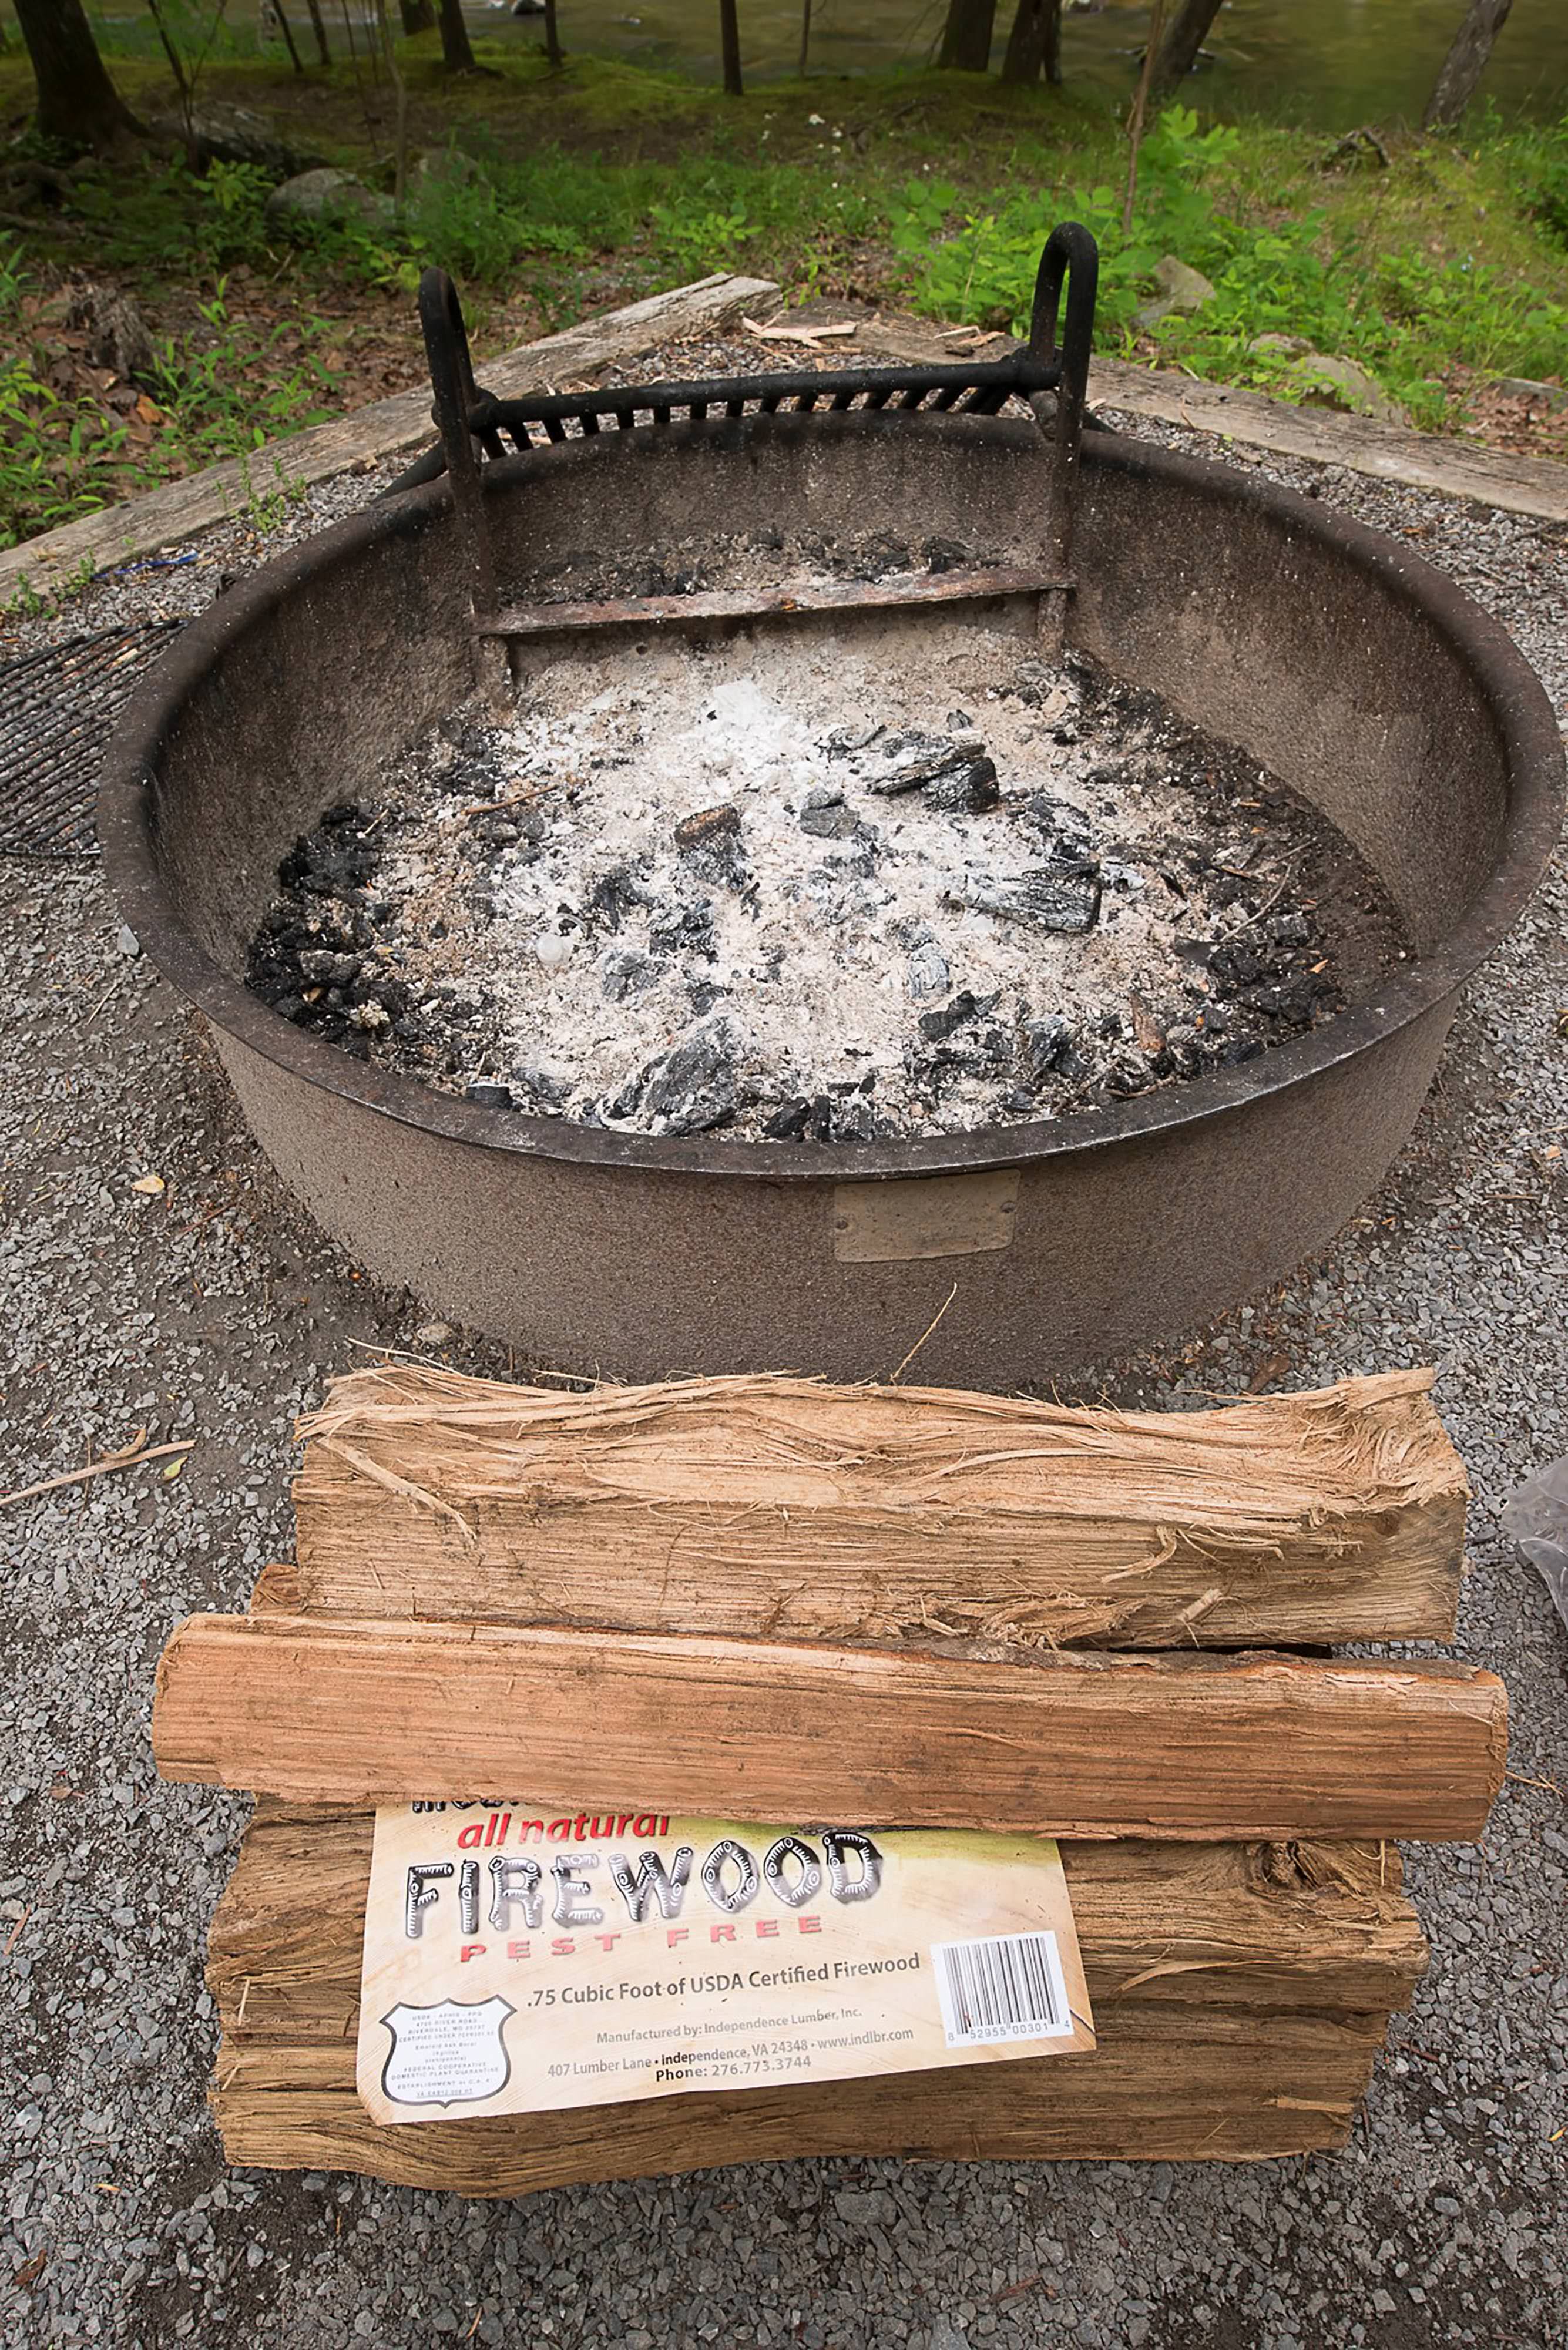 Ash covers the bottom of a large, round metal fire pit. A large piece of firewood lays on the ground in front of the fire pit.